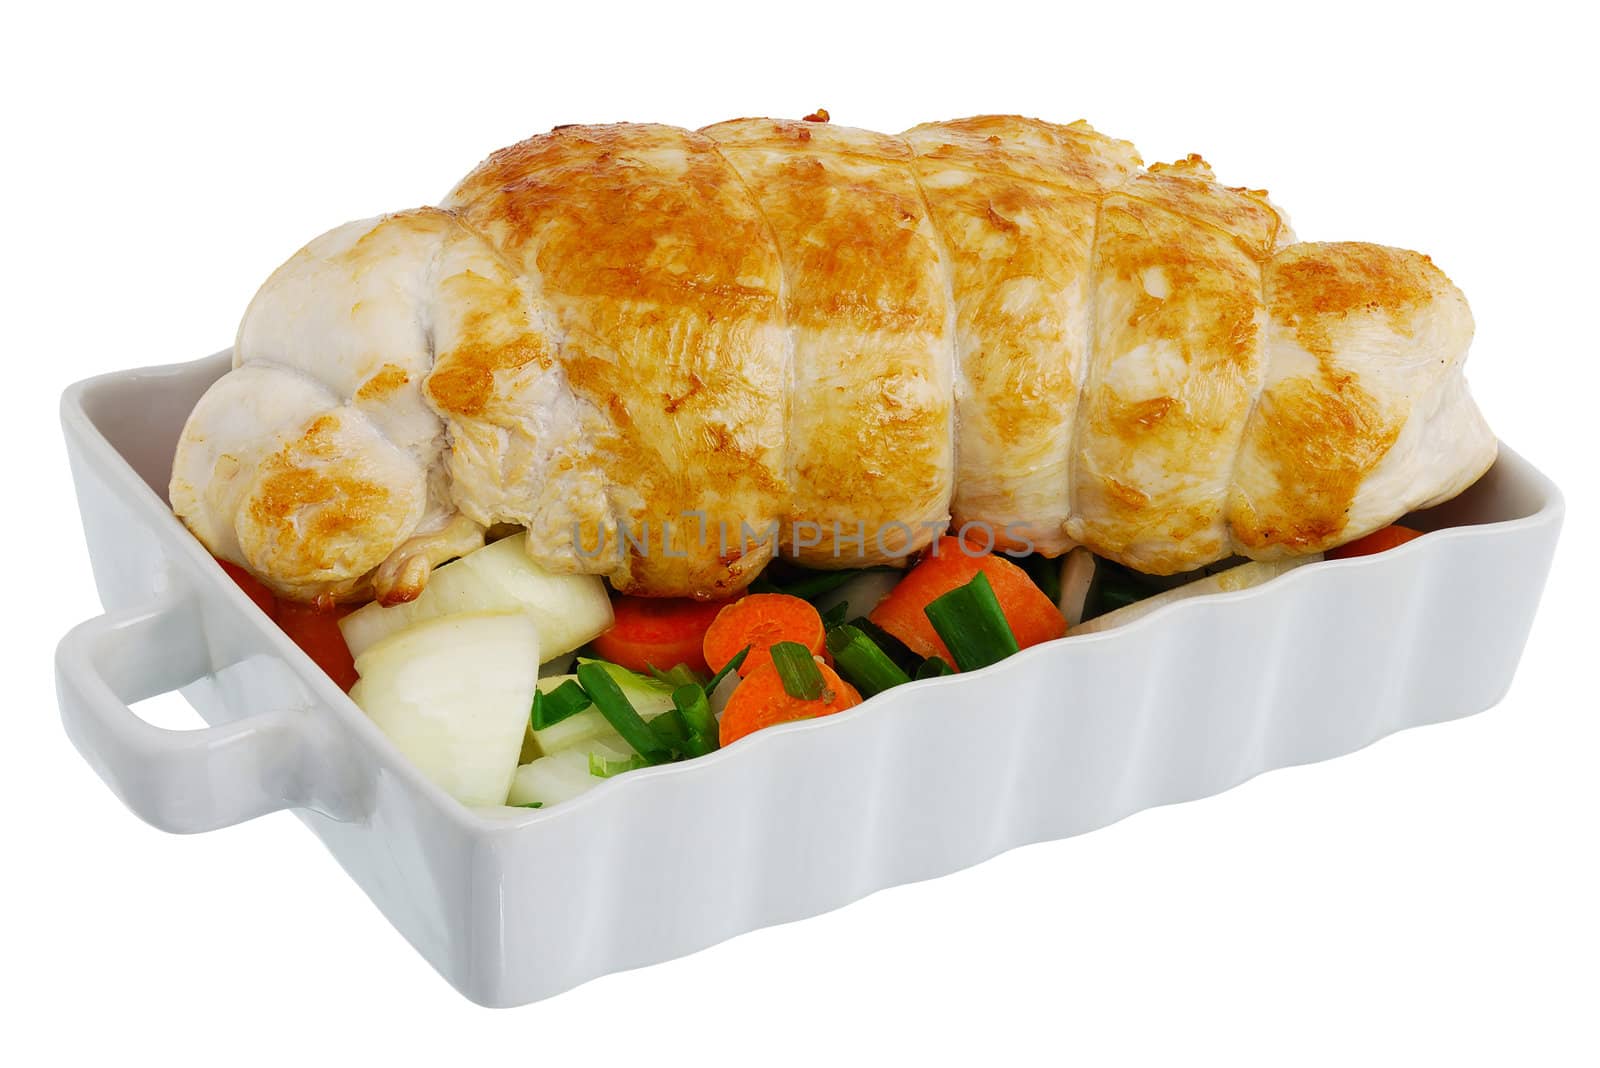 Bound grilled turkey breast with  vegetables on baking pan by vadidak